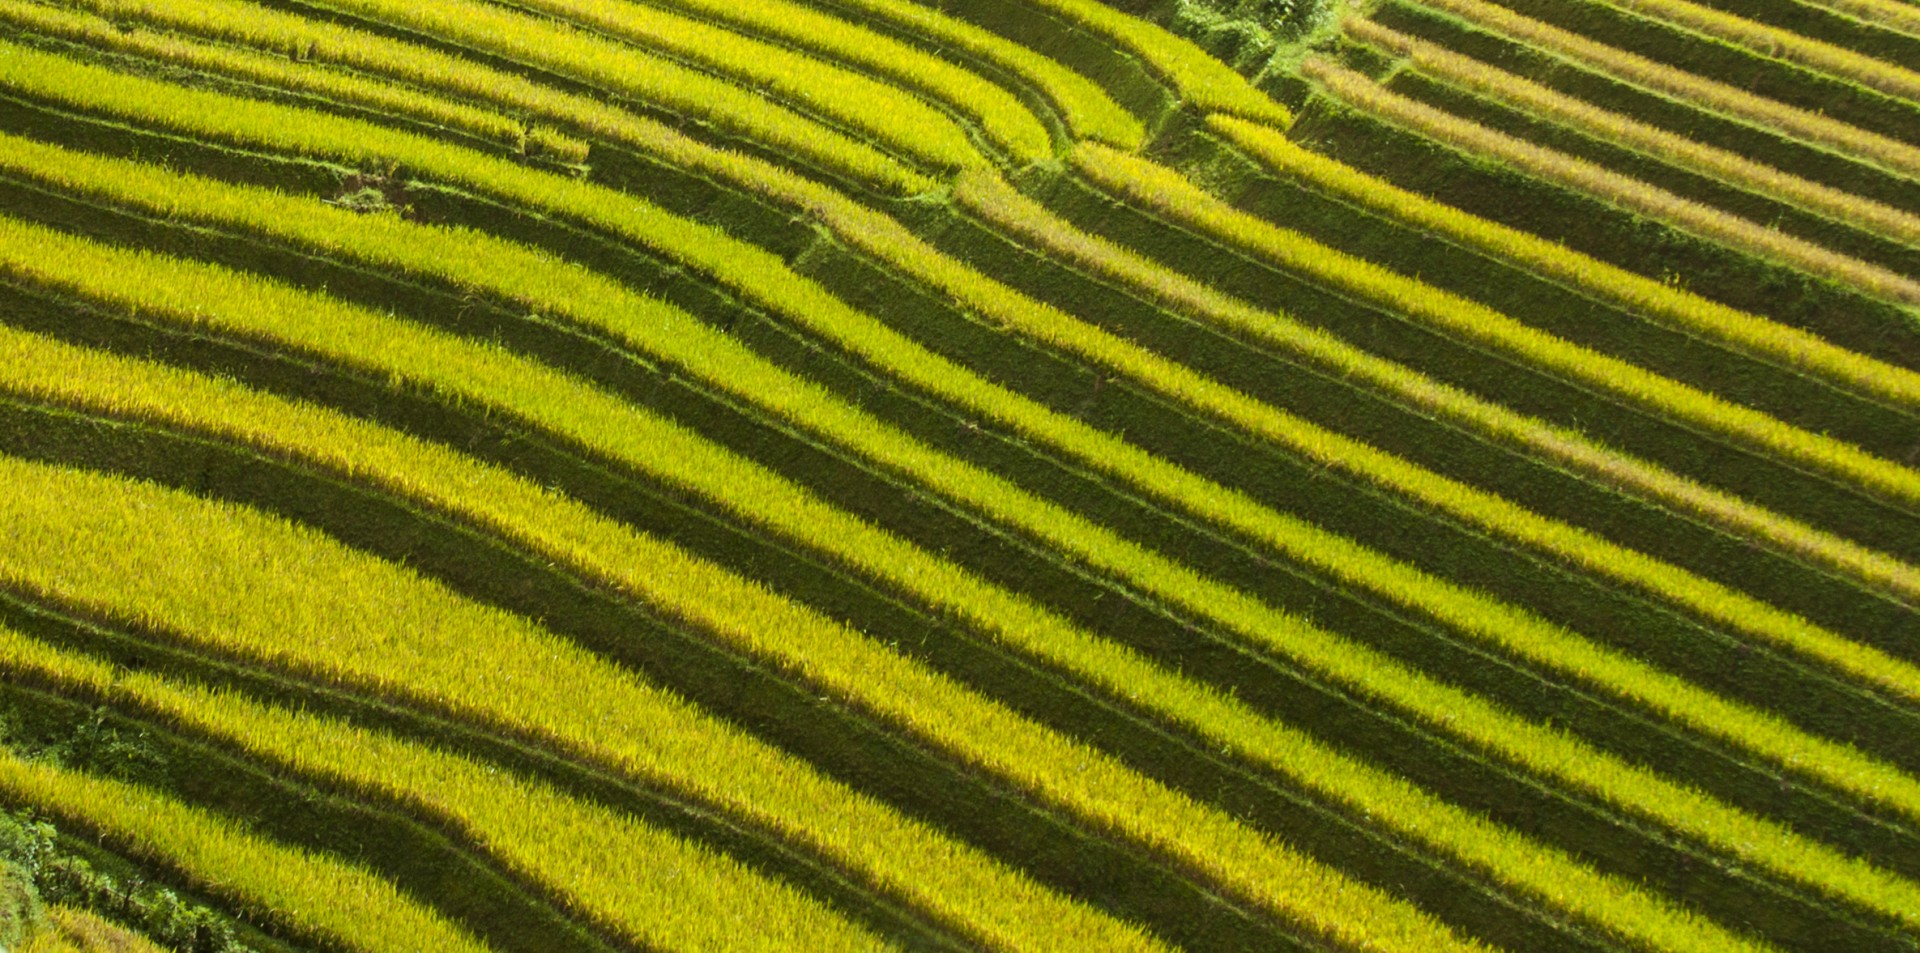 Lines Of Rice Field #1